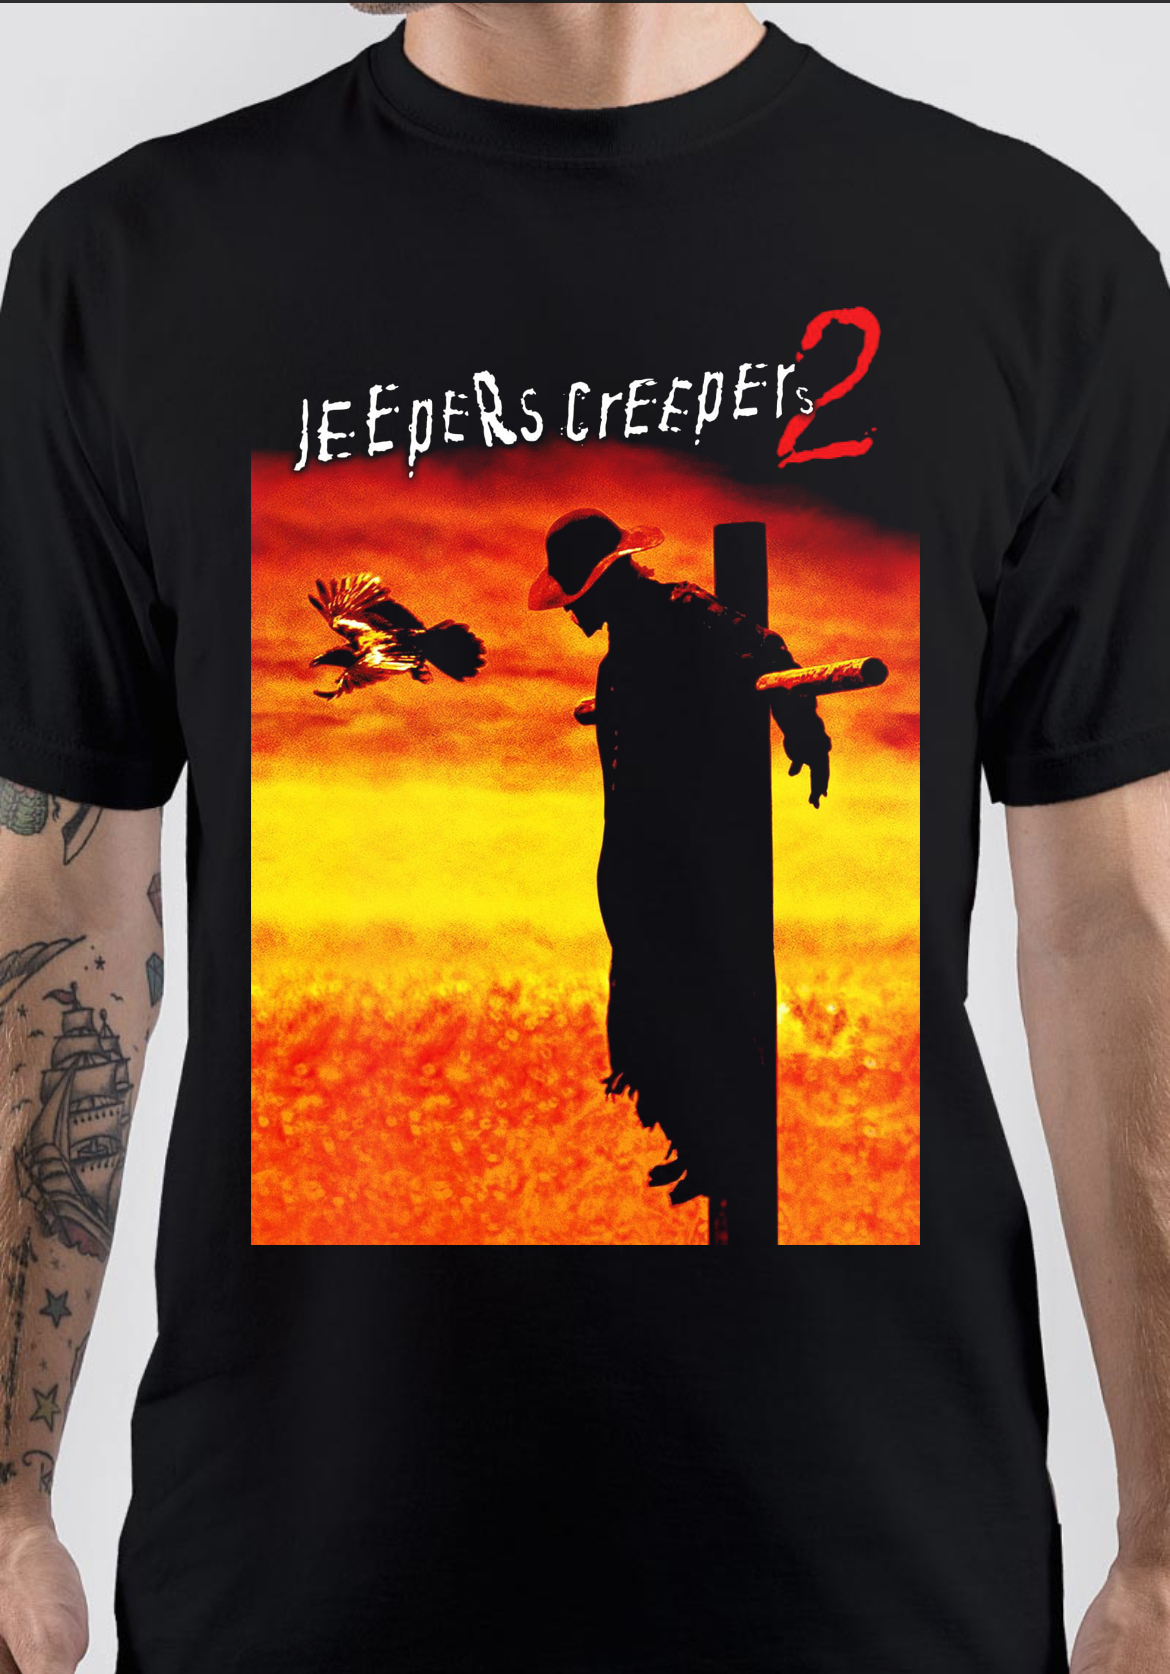 Discover more than 52 jeepers creepers tattoo design super hot   ineteachers